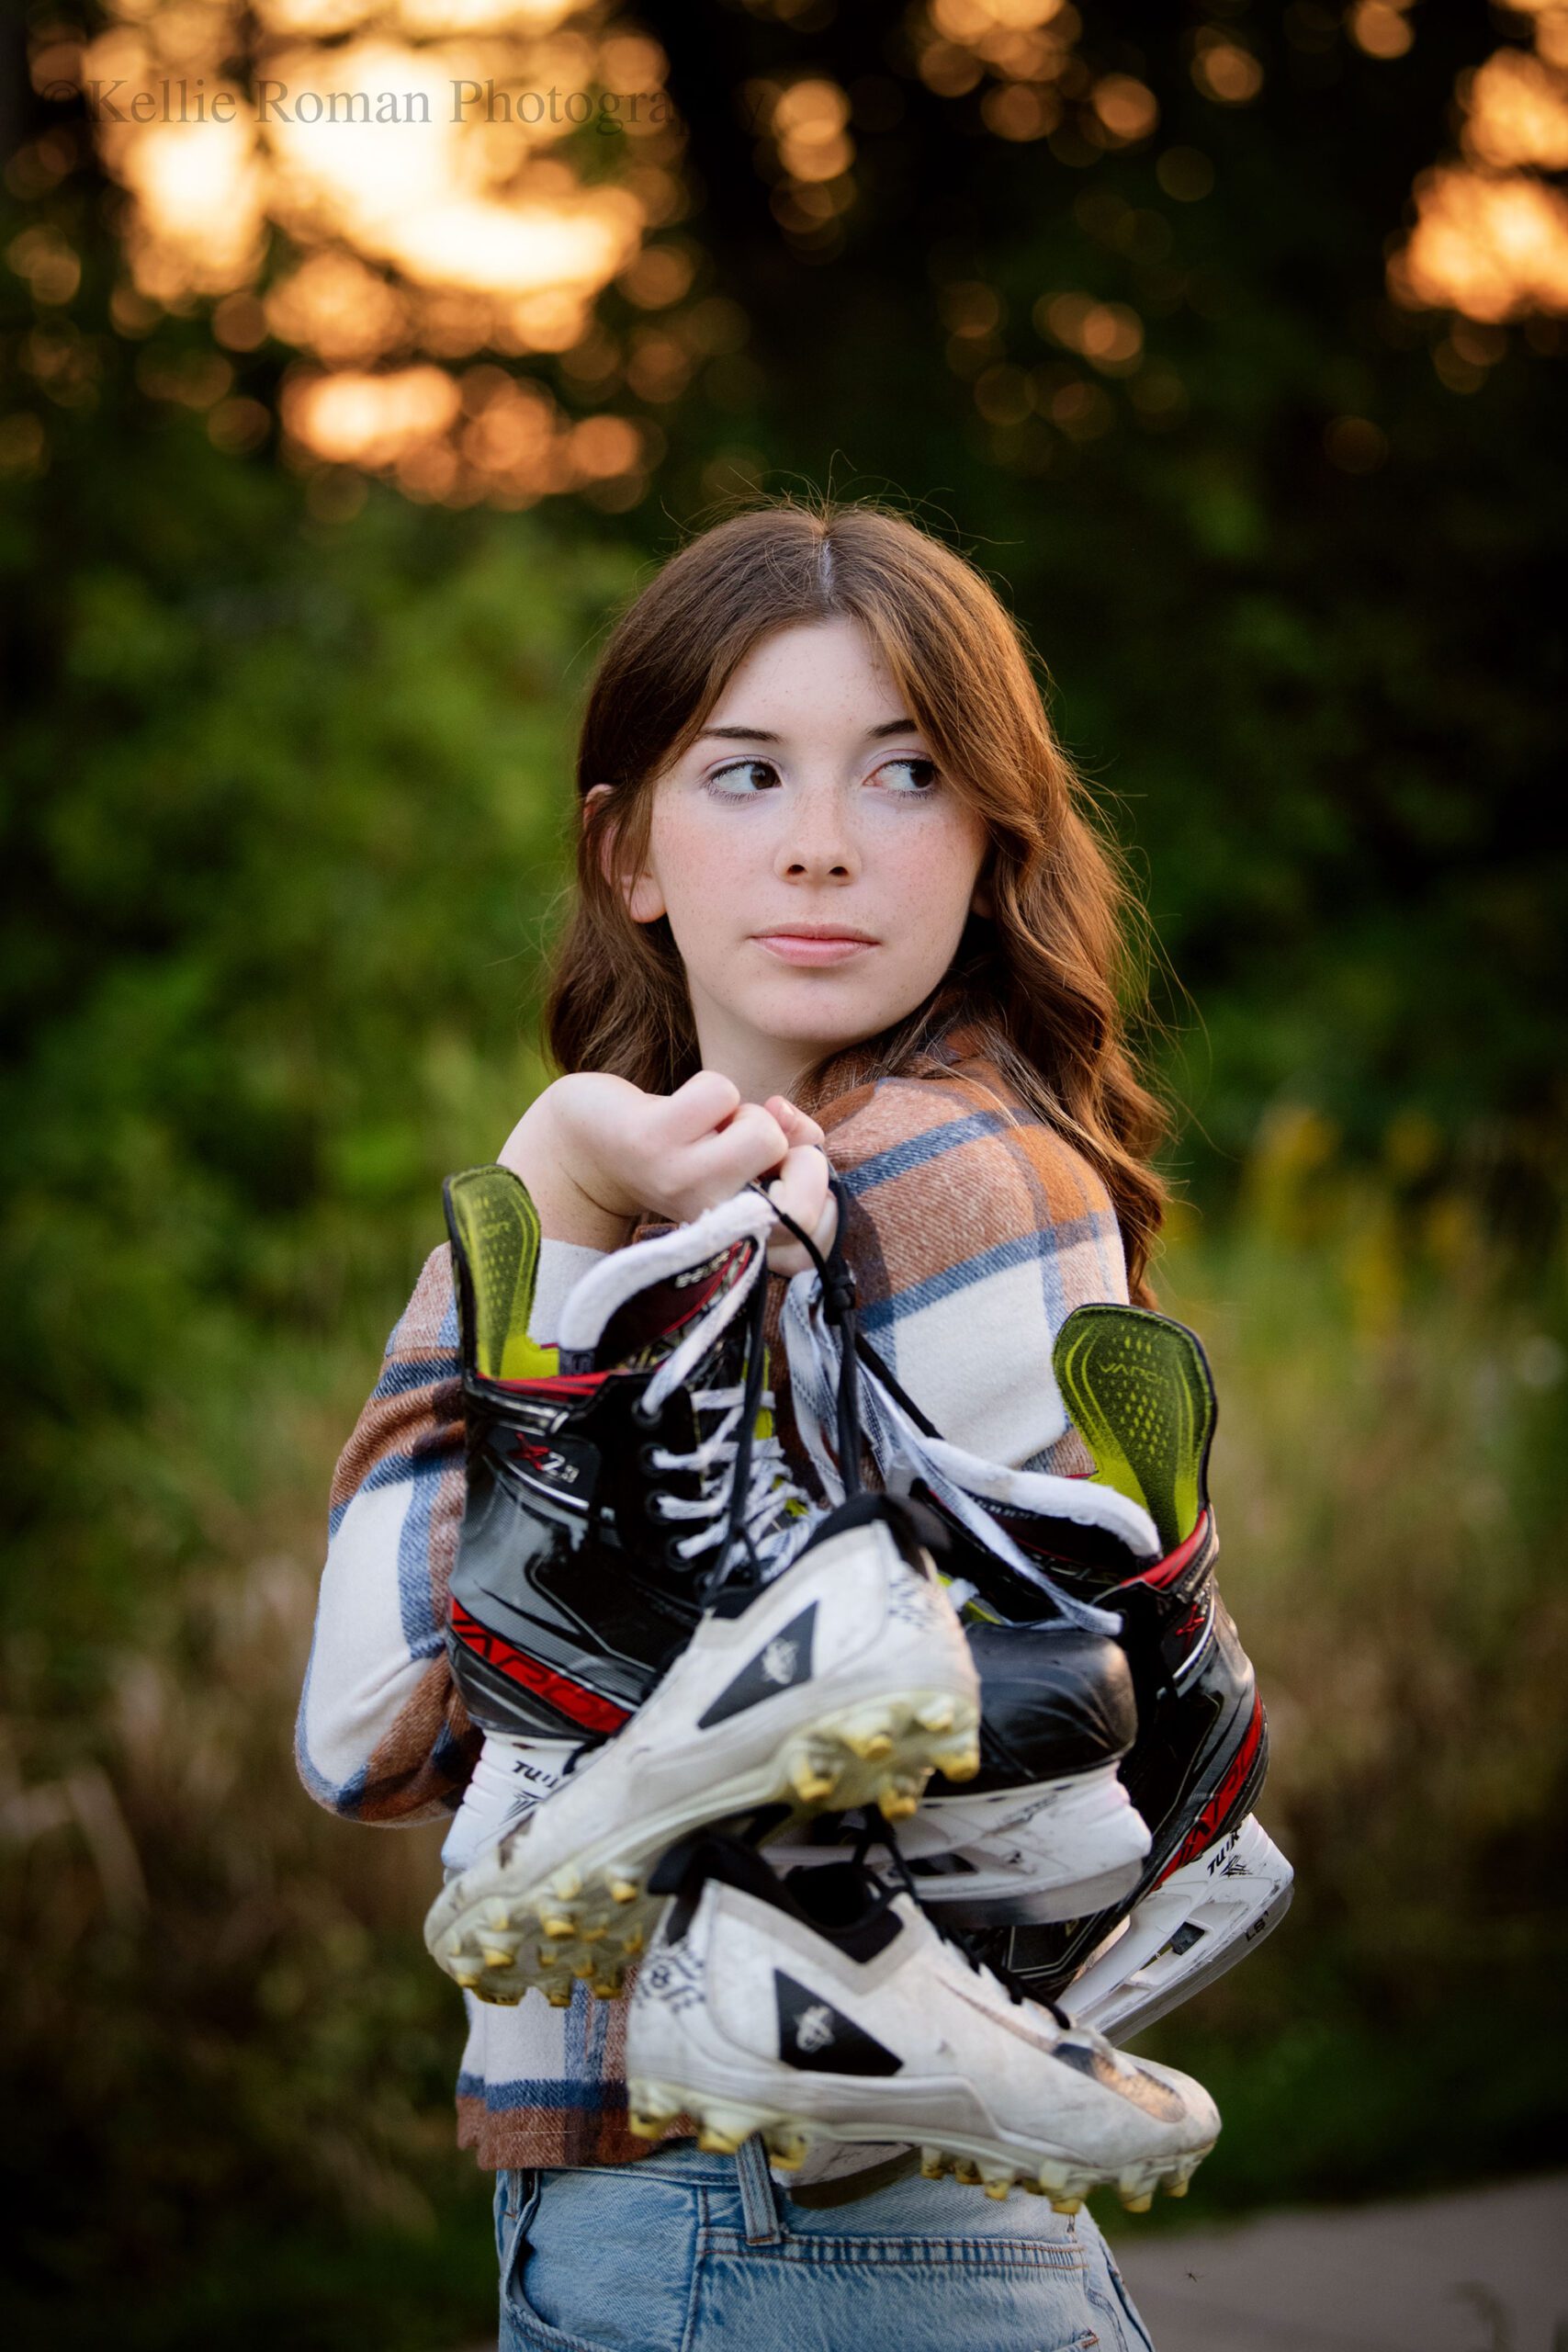 senior photography in milwaukee. high school senior girl wearing jeans and flannel shirt has hockey skates and lacrosse cleats over her shoulder while she is looking behind her.
